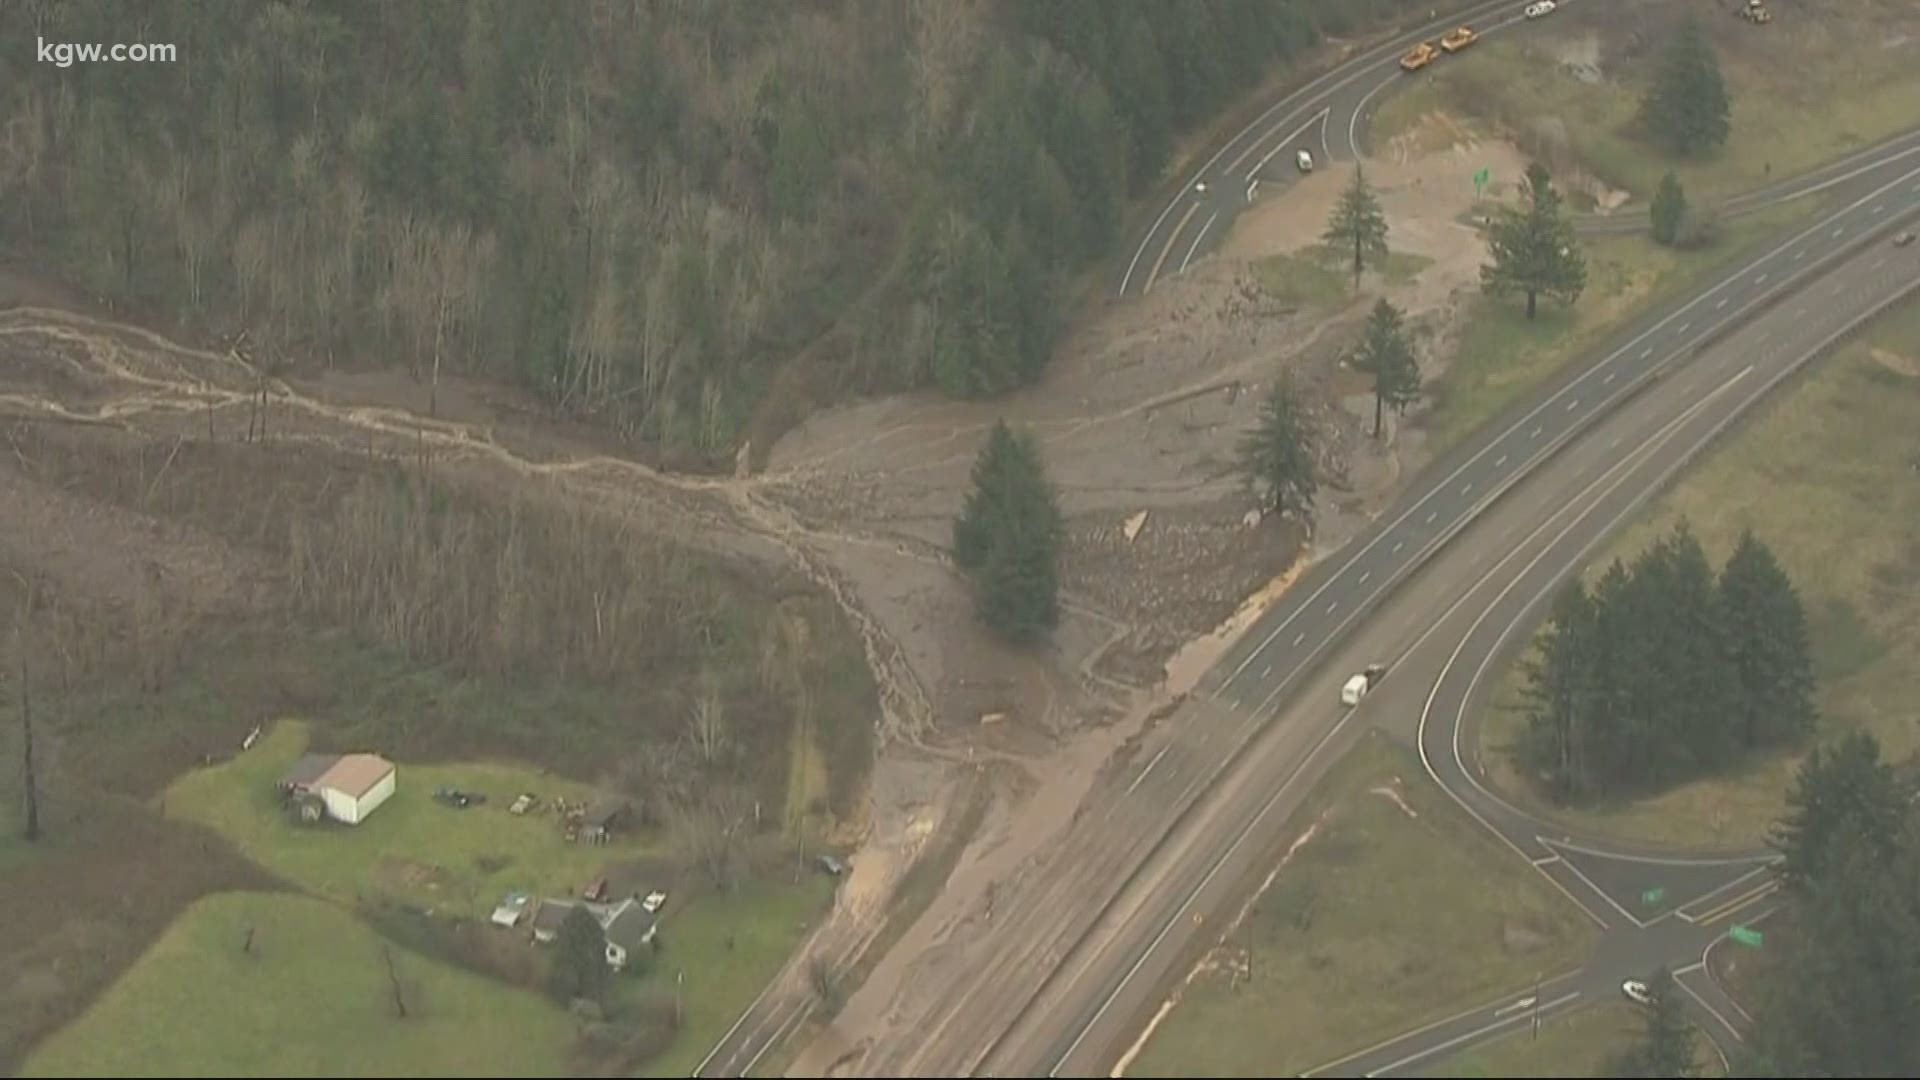 A woman is missing after a landslide near I-84 in the Columbia River Gorge. Tim Gordon has the latest.